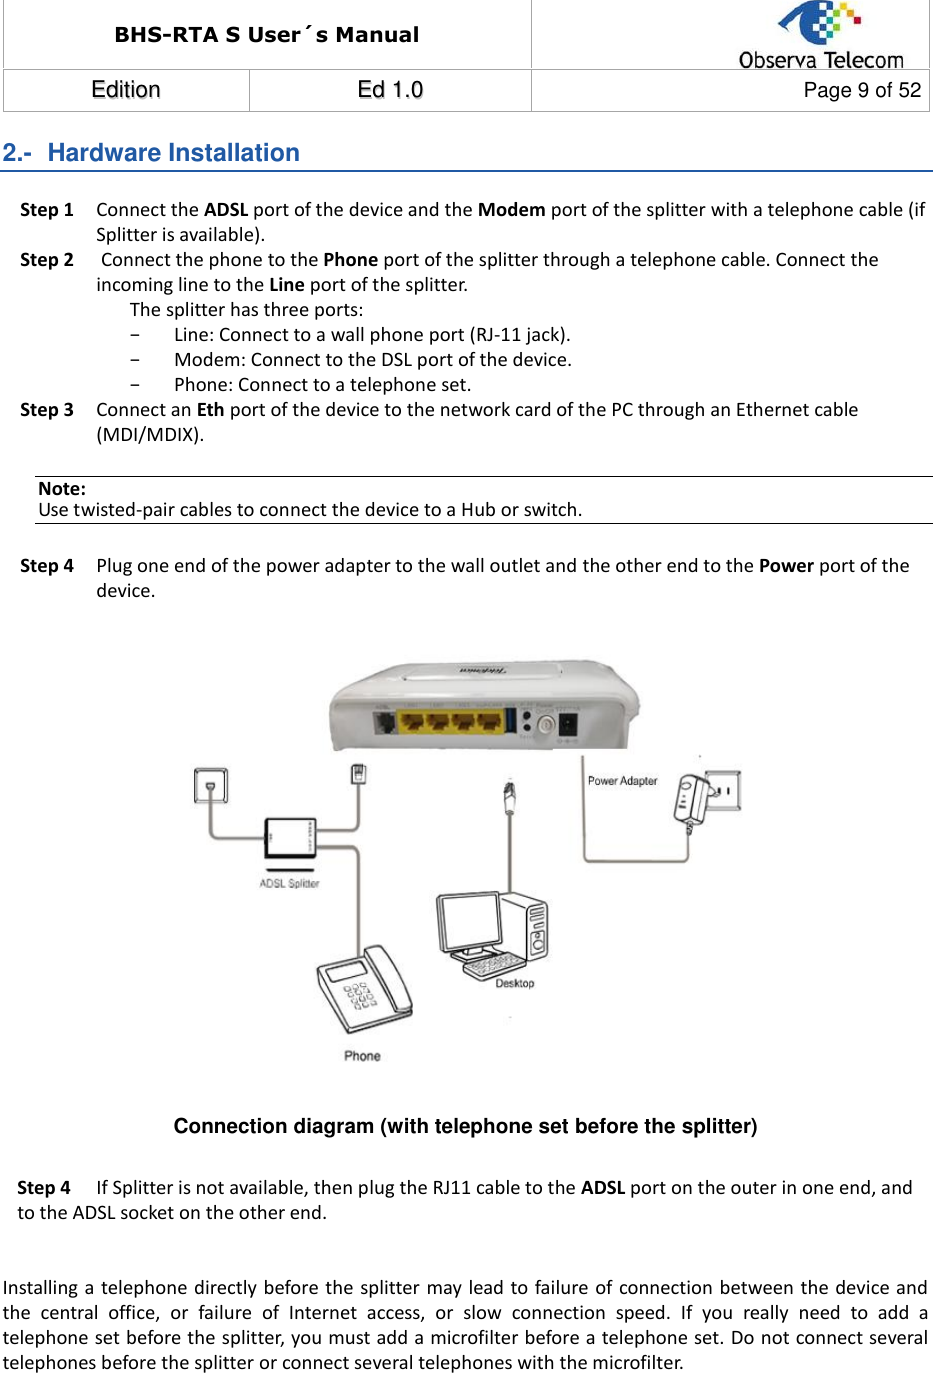 BHS-RTA S User´s Manual  EEddiittiioonn  EEdd  11..00  Page 9 of 52  2.-  Hardware Installation Step 1 Connect the ADSL port of the device and the Modem port of the splitter with a telephone cable (if Splitter is available).  Step 2  Connect the phone to the Phone port of the splitter through a telephone cable. Connect the incoming line to the Line port of the splitter. The splitter has three ports: − Line: Connect to a wall phone port (RJ-11 jack). − Modem: Connect to the DSL port of the device. − Phone: Connect to a telephone set. Step 3 Connect an Eth port of the device to the network card of the PC through an Ethernet cable (MDI/MDIX). Note: Use twisted-pair cables to connect the device to a Hub or switch. Step 4 Plug one end of the power adapter to the wall outlet and the other end to the Power port of the device.               Connection diagram (with telephone set before the splitter)  Step 4   If Splitter is not available, then plug the RJ11 cable to the ADSL port on the outer in one end, and to the ADSL socket on the other end.    Installing a telephone directly before the splitter may lead to failure of connection between the device and the  central  office,  or  failure  of  Internet  access,  or  slow  connection  speed.  If  you  really  need  to  add  a telephone set before the splitter, you must add a microfilter before a telephone set. Do not connect several telephones before the splitter or connect several telephones with the microfilter.       